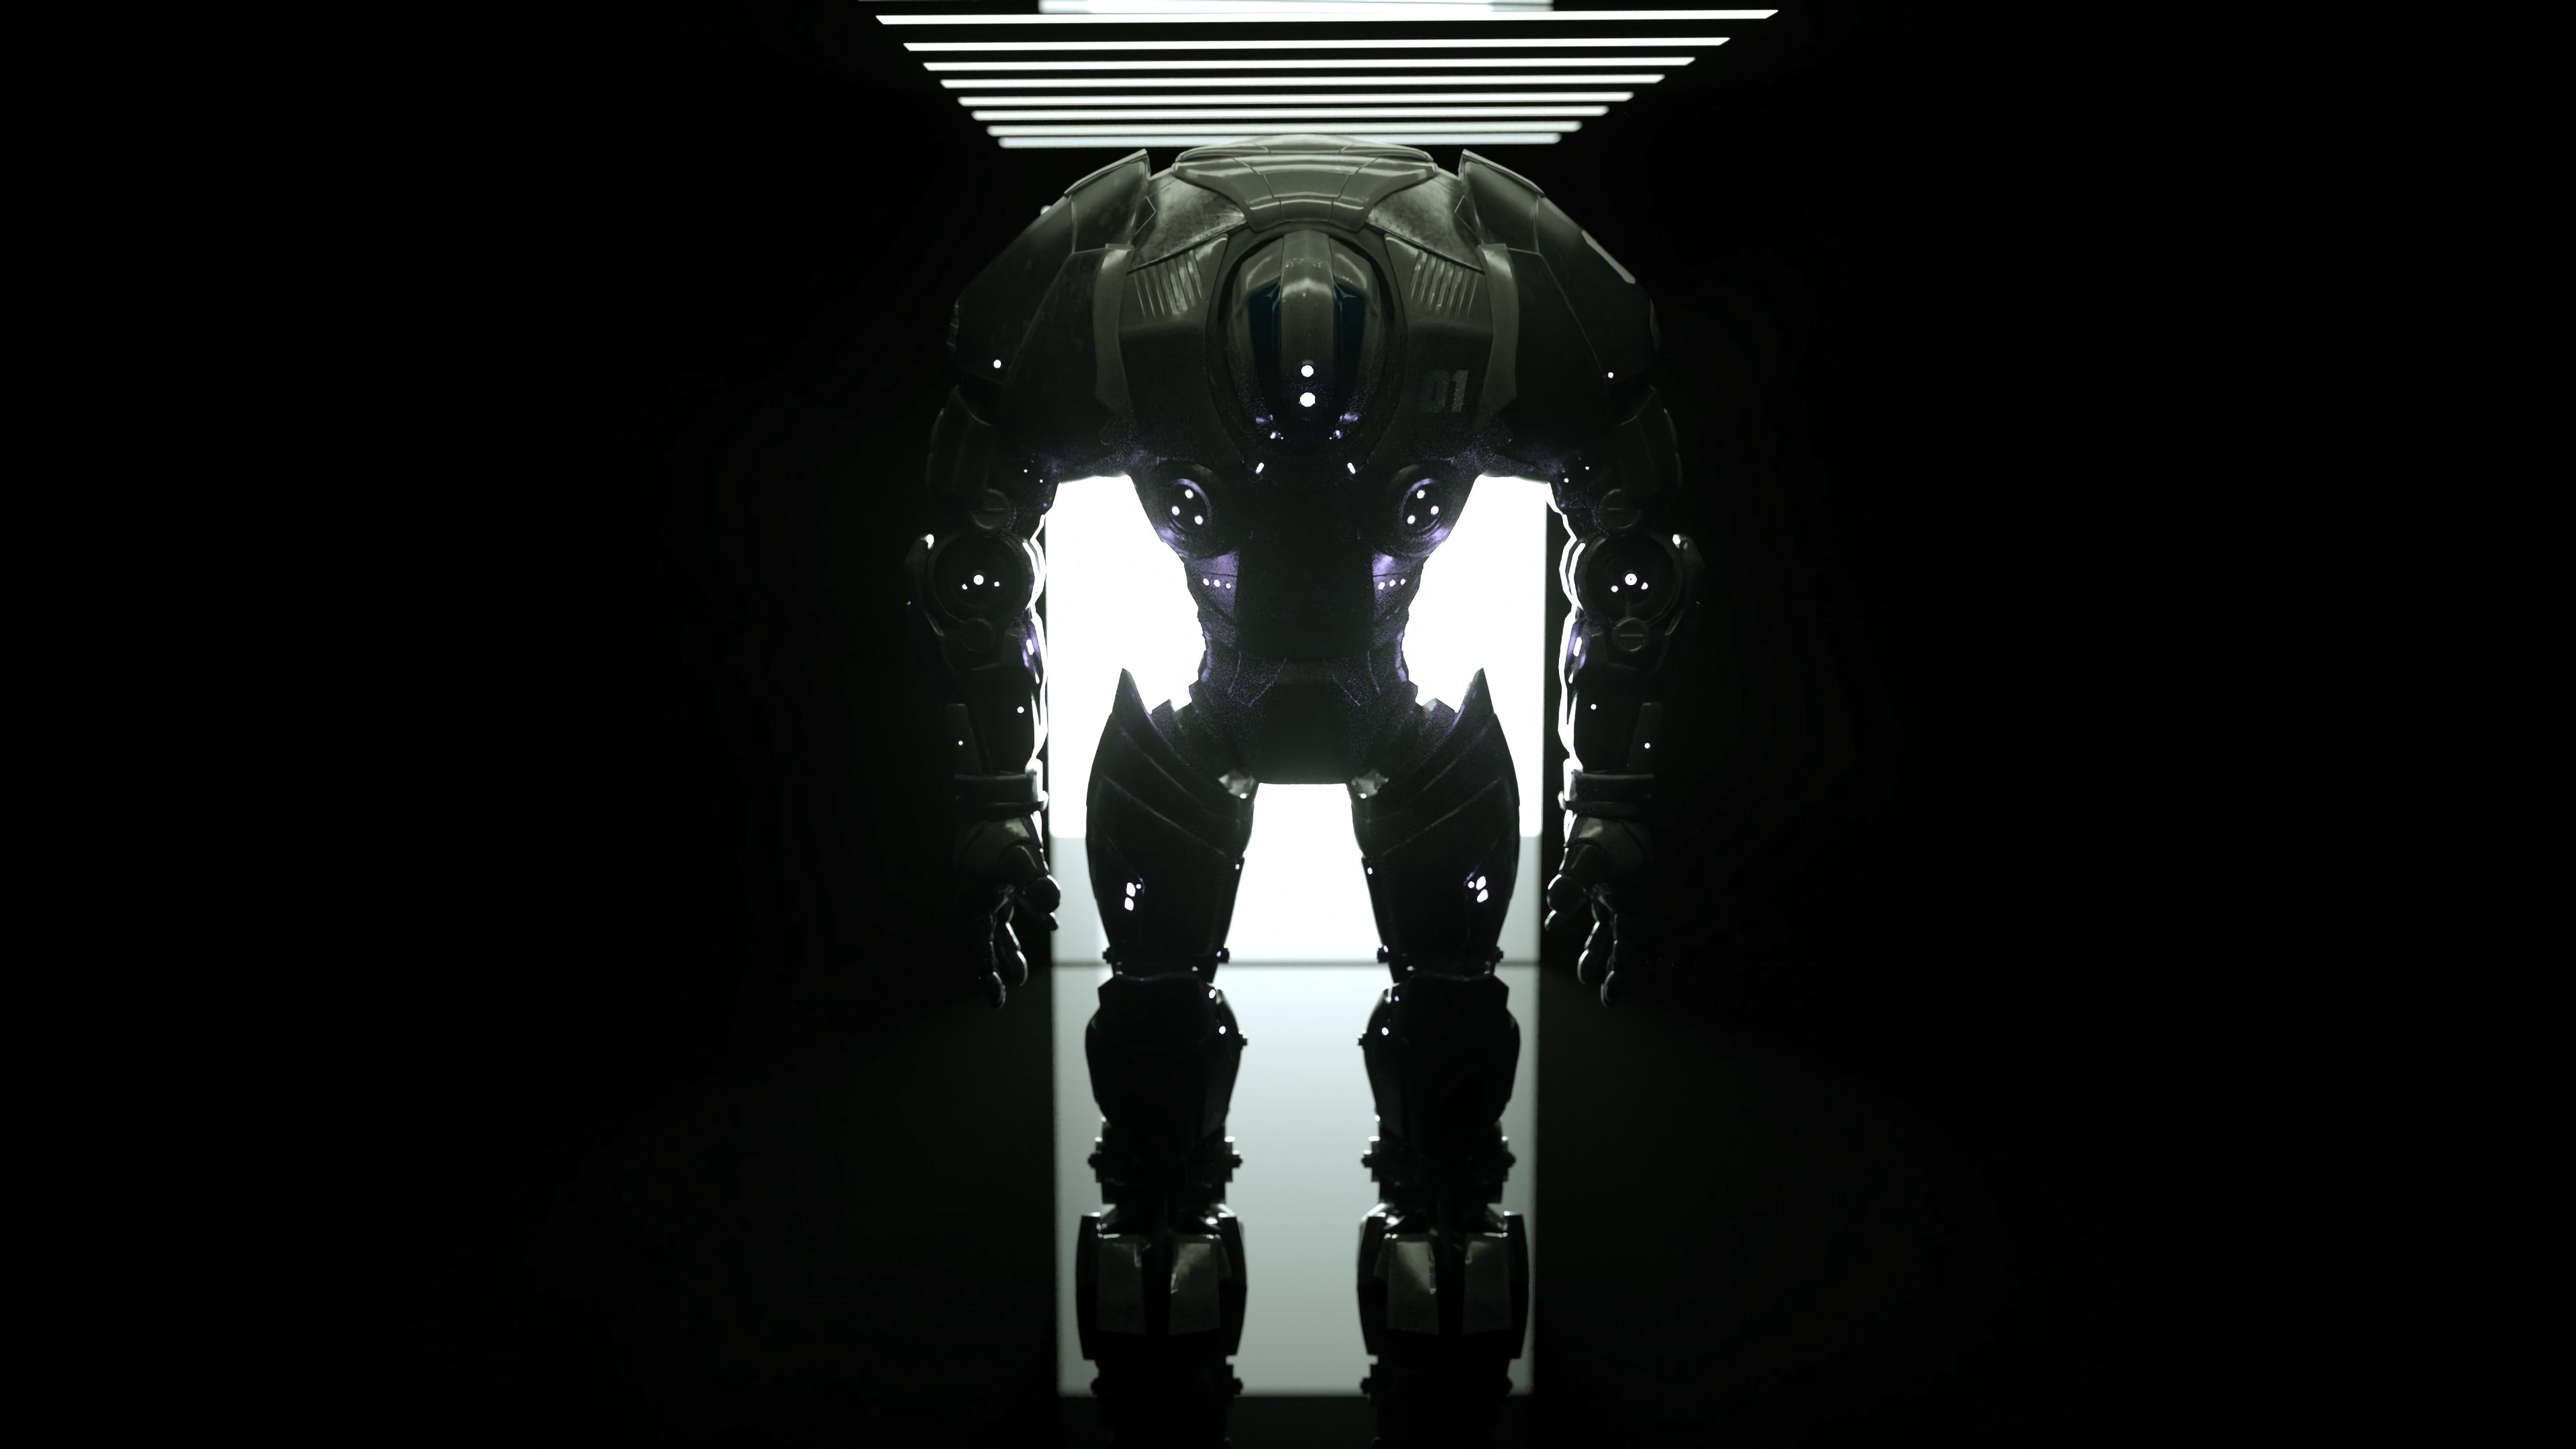 cyborg, robot, glow, technology home screen for smartphone